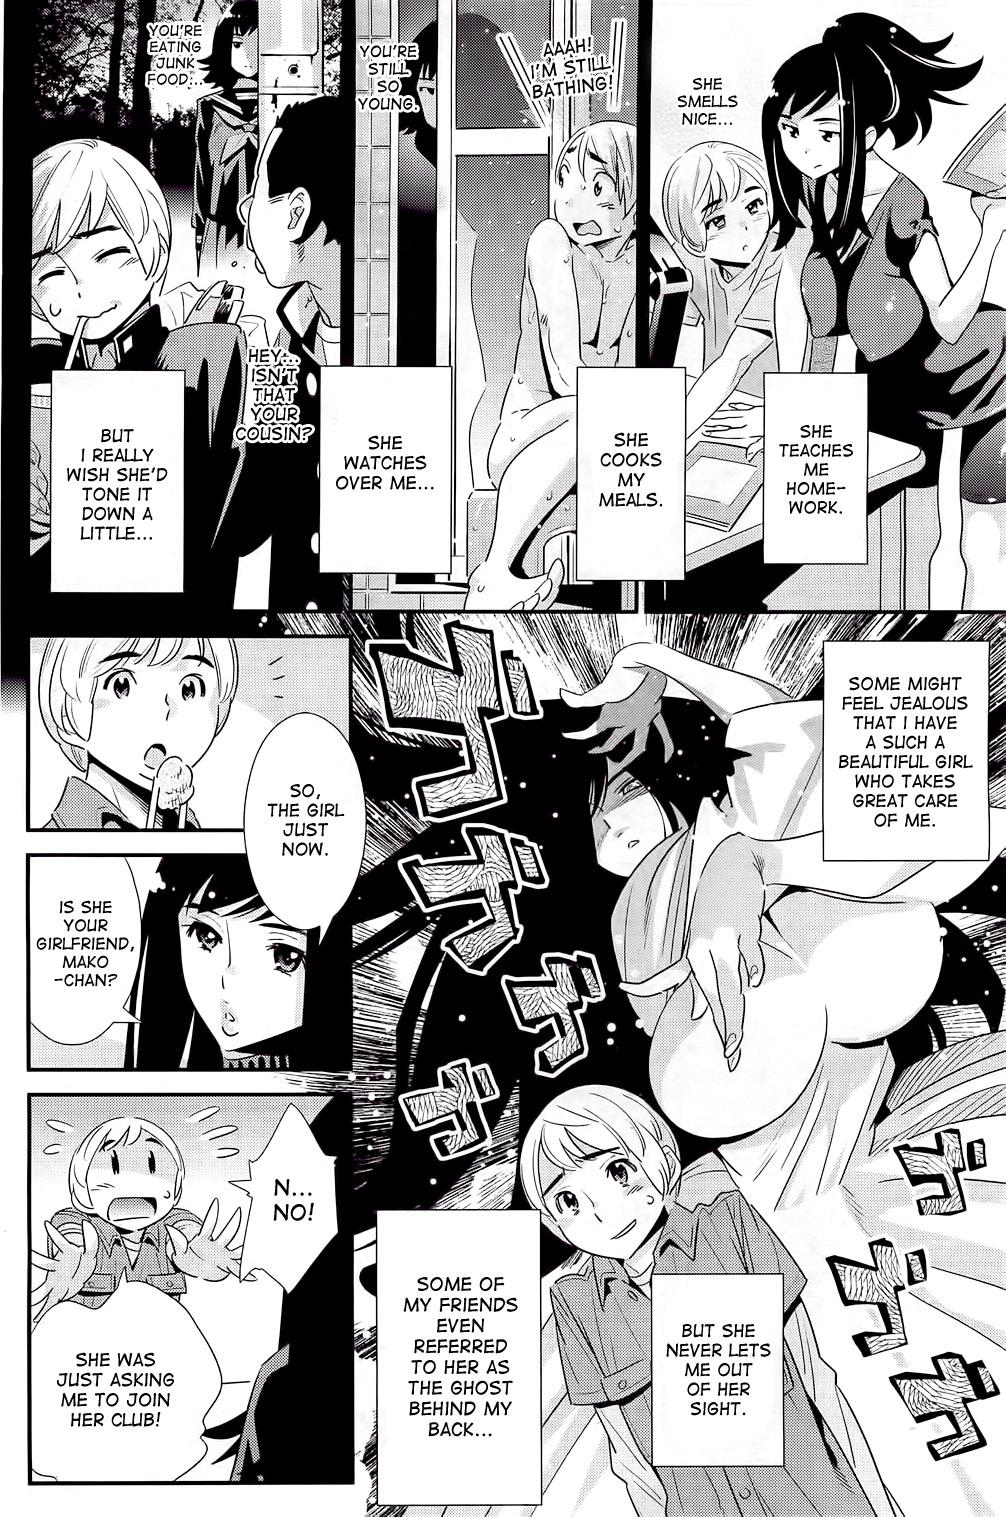 Bed Boku no Haigorei? | The Ghost Behind My Back Fudendo - Page 4